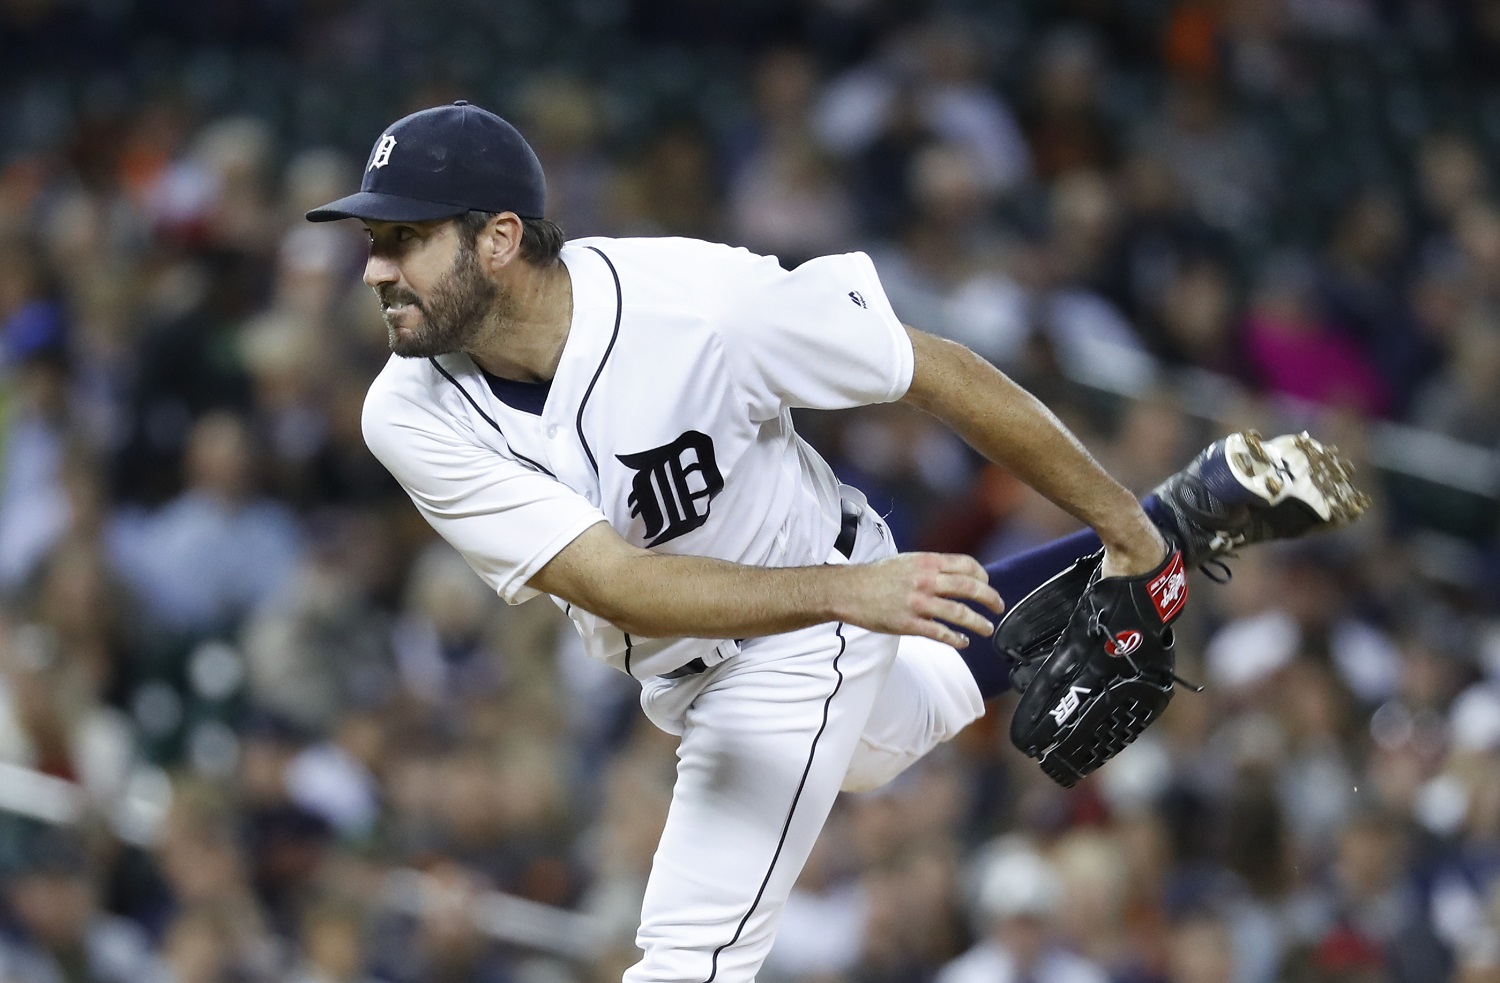 Detroit Tigers pitcher Justin Verlander follows through on a pitch to a Cleveland Indians batter during the sixth inning of a baseball game in Detroit, Tuesday, Sept. 27, 2016. (AP Photo/Paul Sancya)